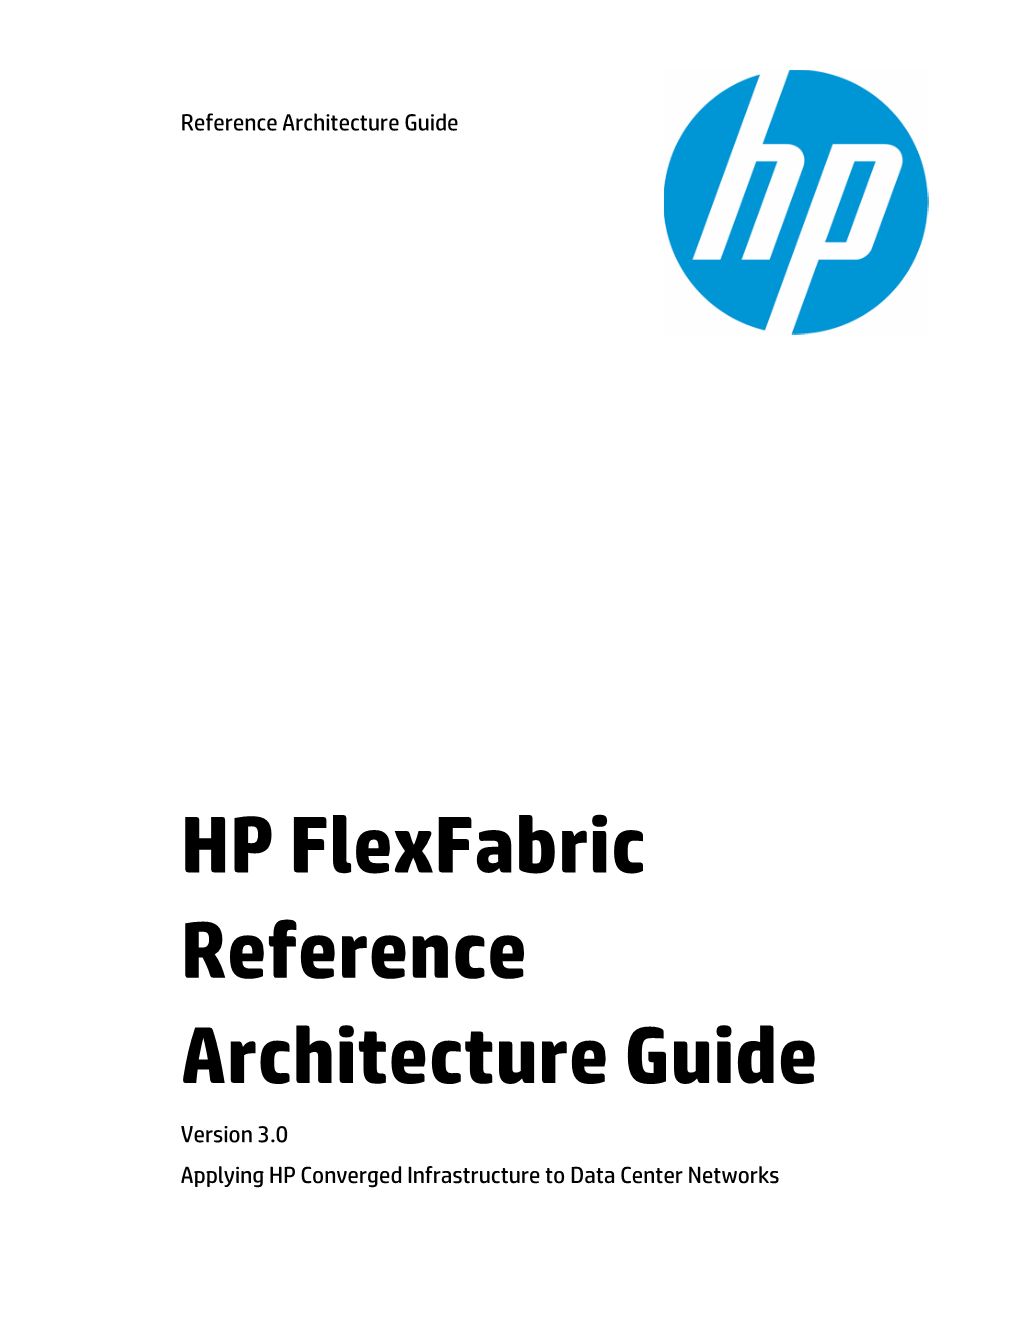 HP Flexfabric Reference Architecture Guide Version 3.0 Applying HP Converged Infrastructure to Data Center Networks